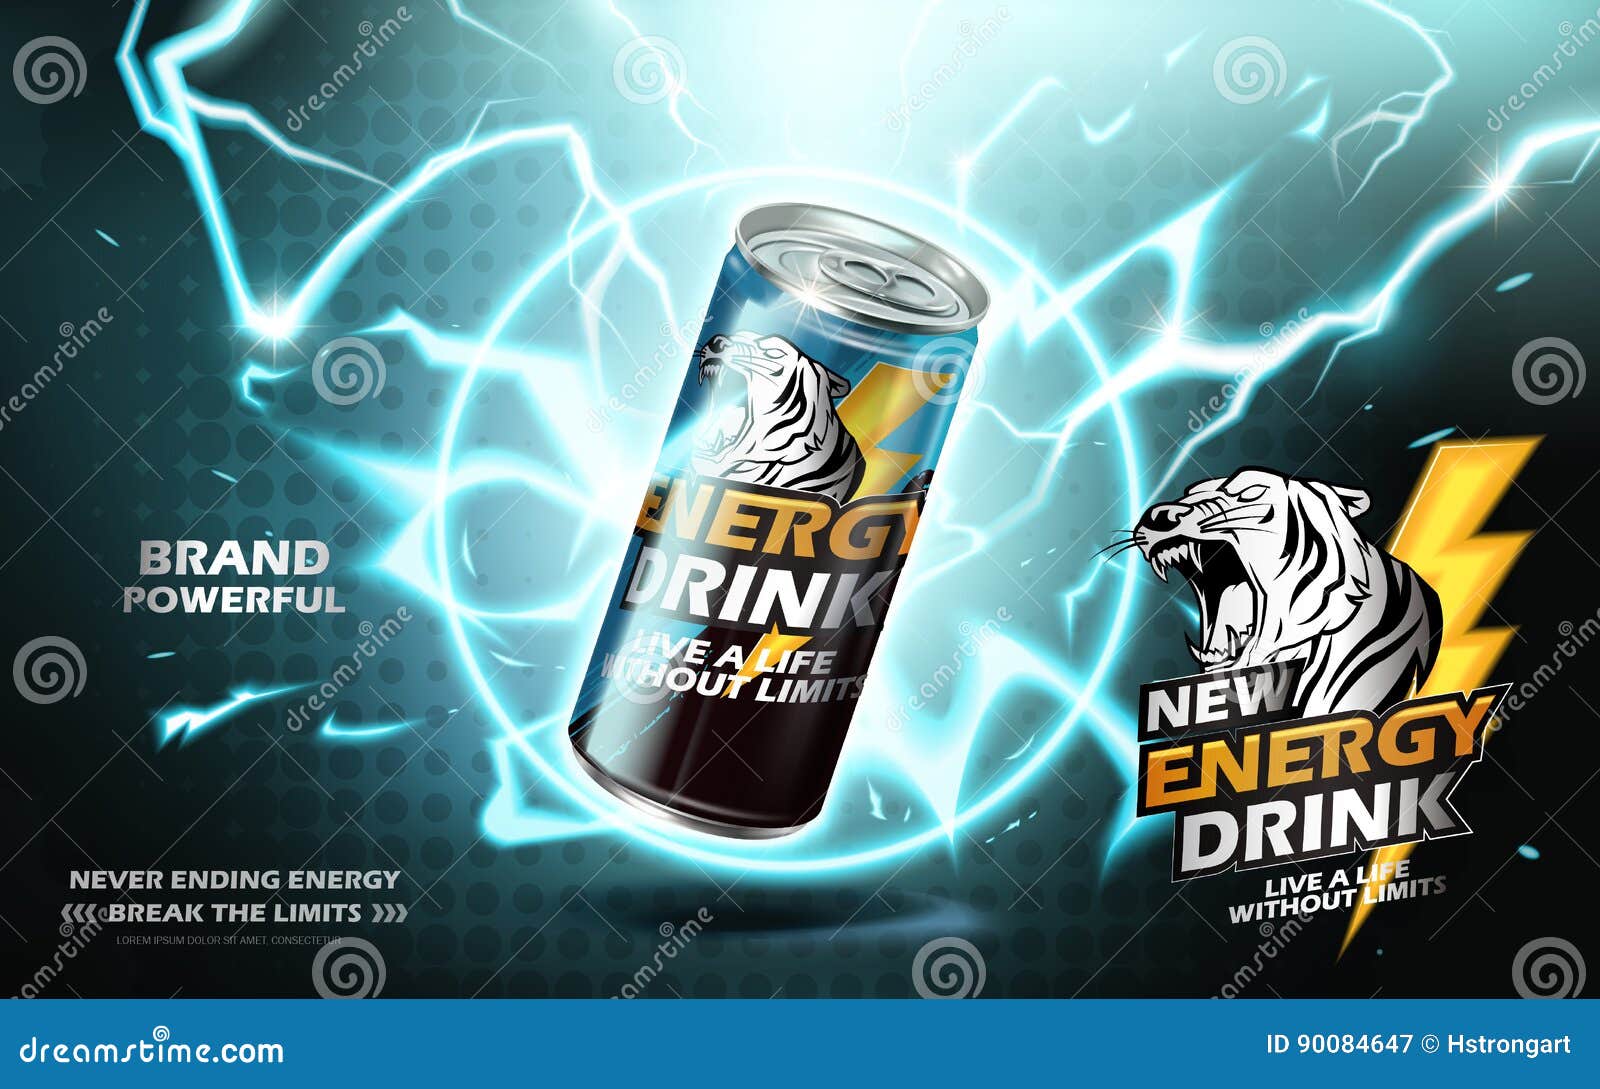 Energy drink ad stock vector. Illustration of brand, science - 90084647